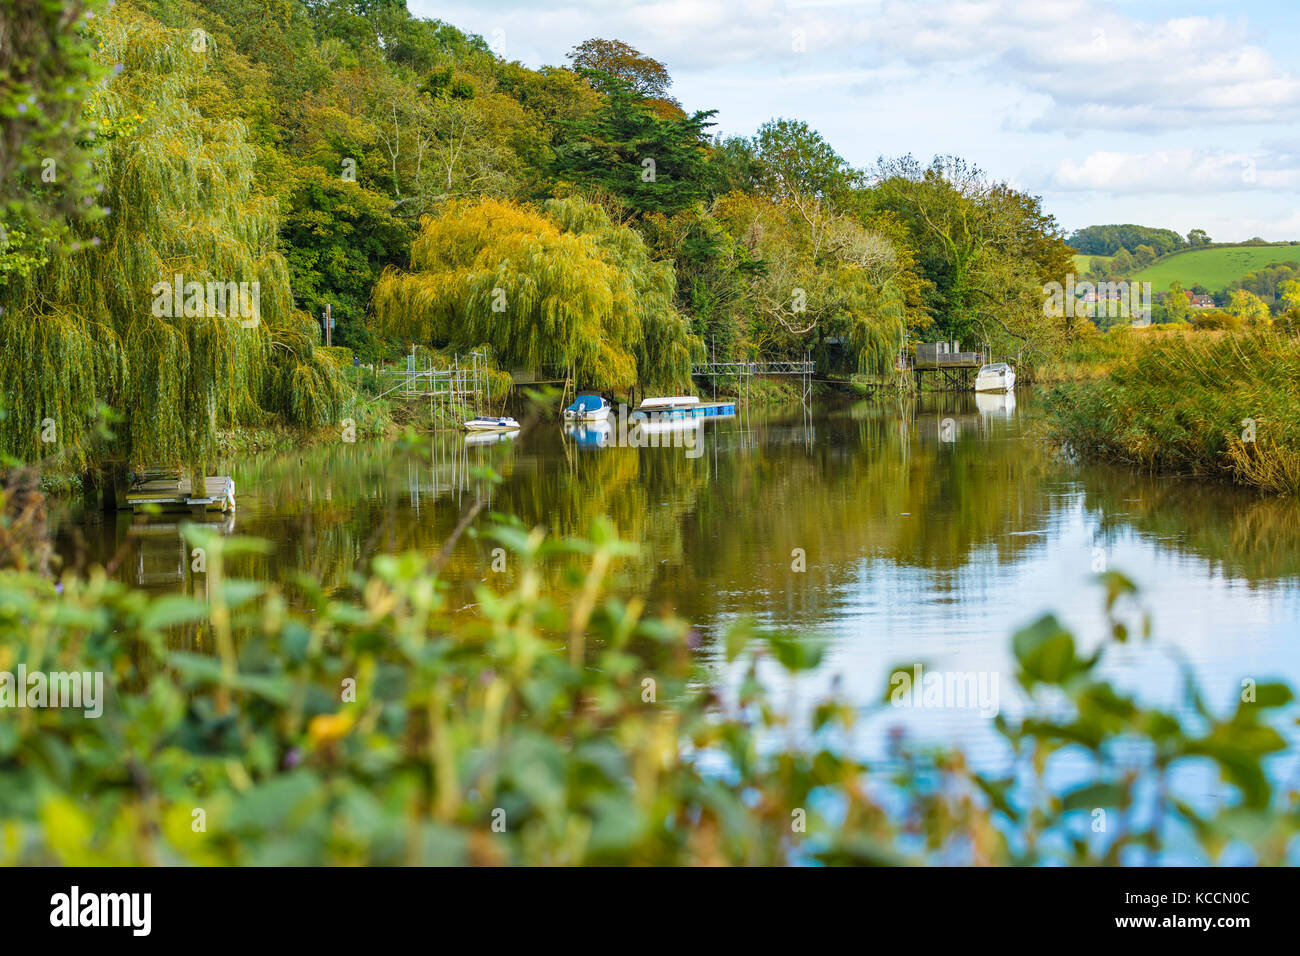 River scene in Autumn with trees reflecting in the water at the River Arun, Arundel, West Sussex, England, UK. Stock Photo